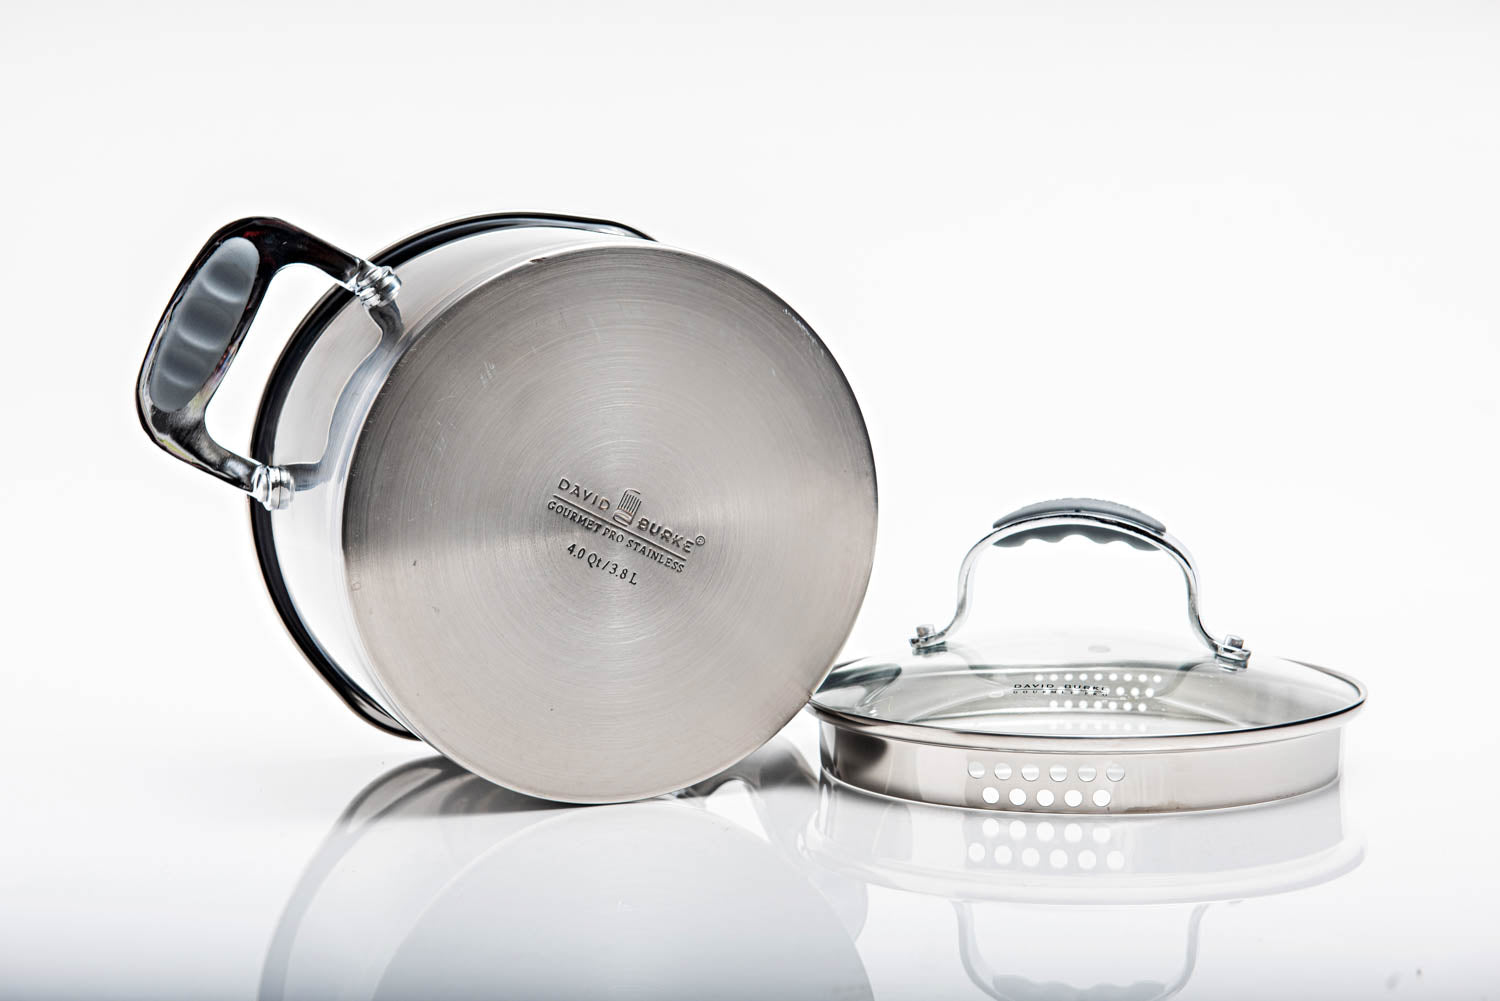 Chef's Kiss on Instagram: With the David Burke Stature Cookware